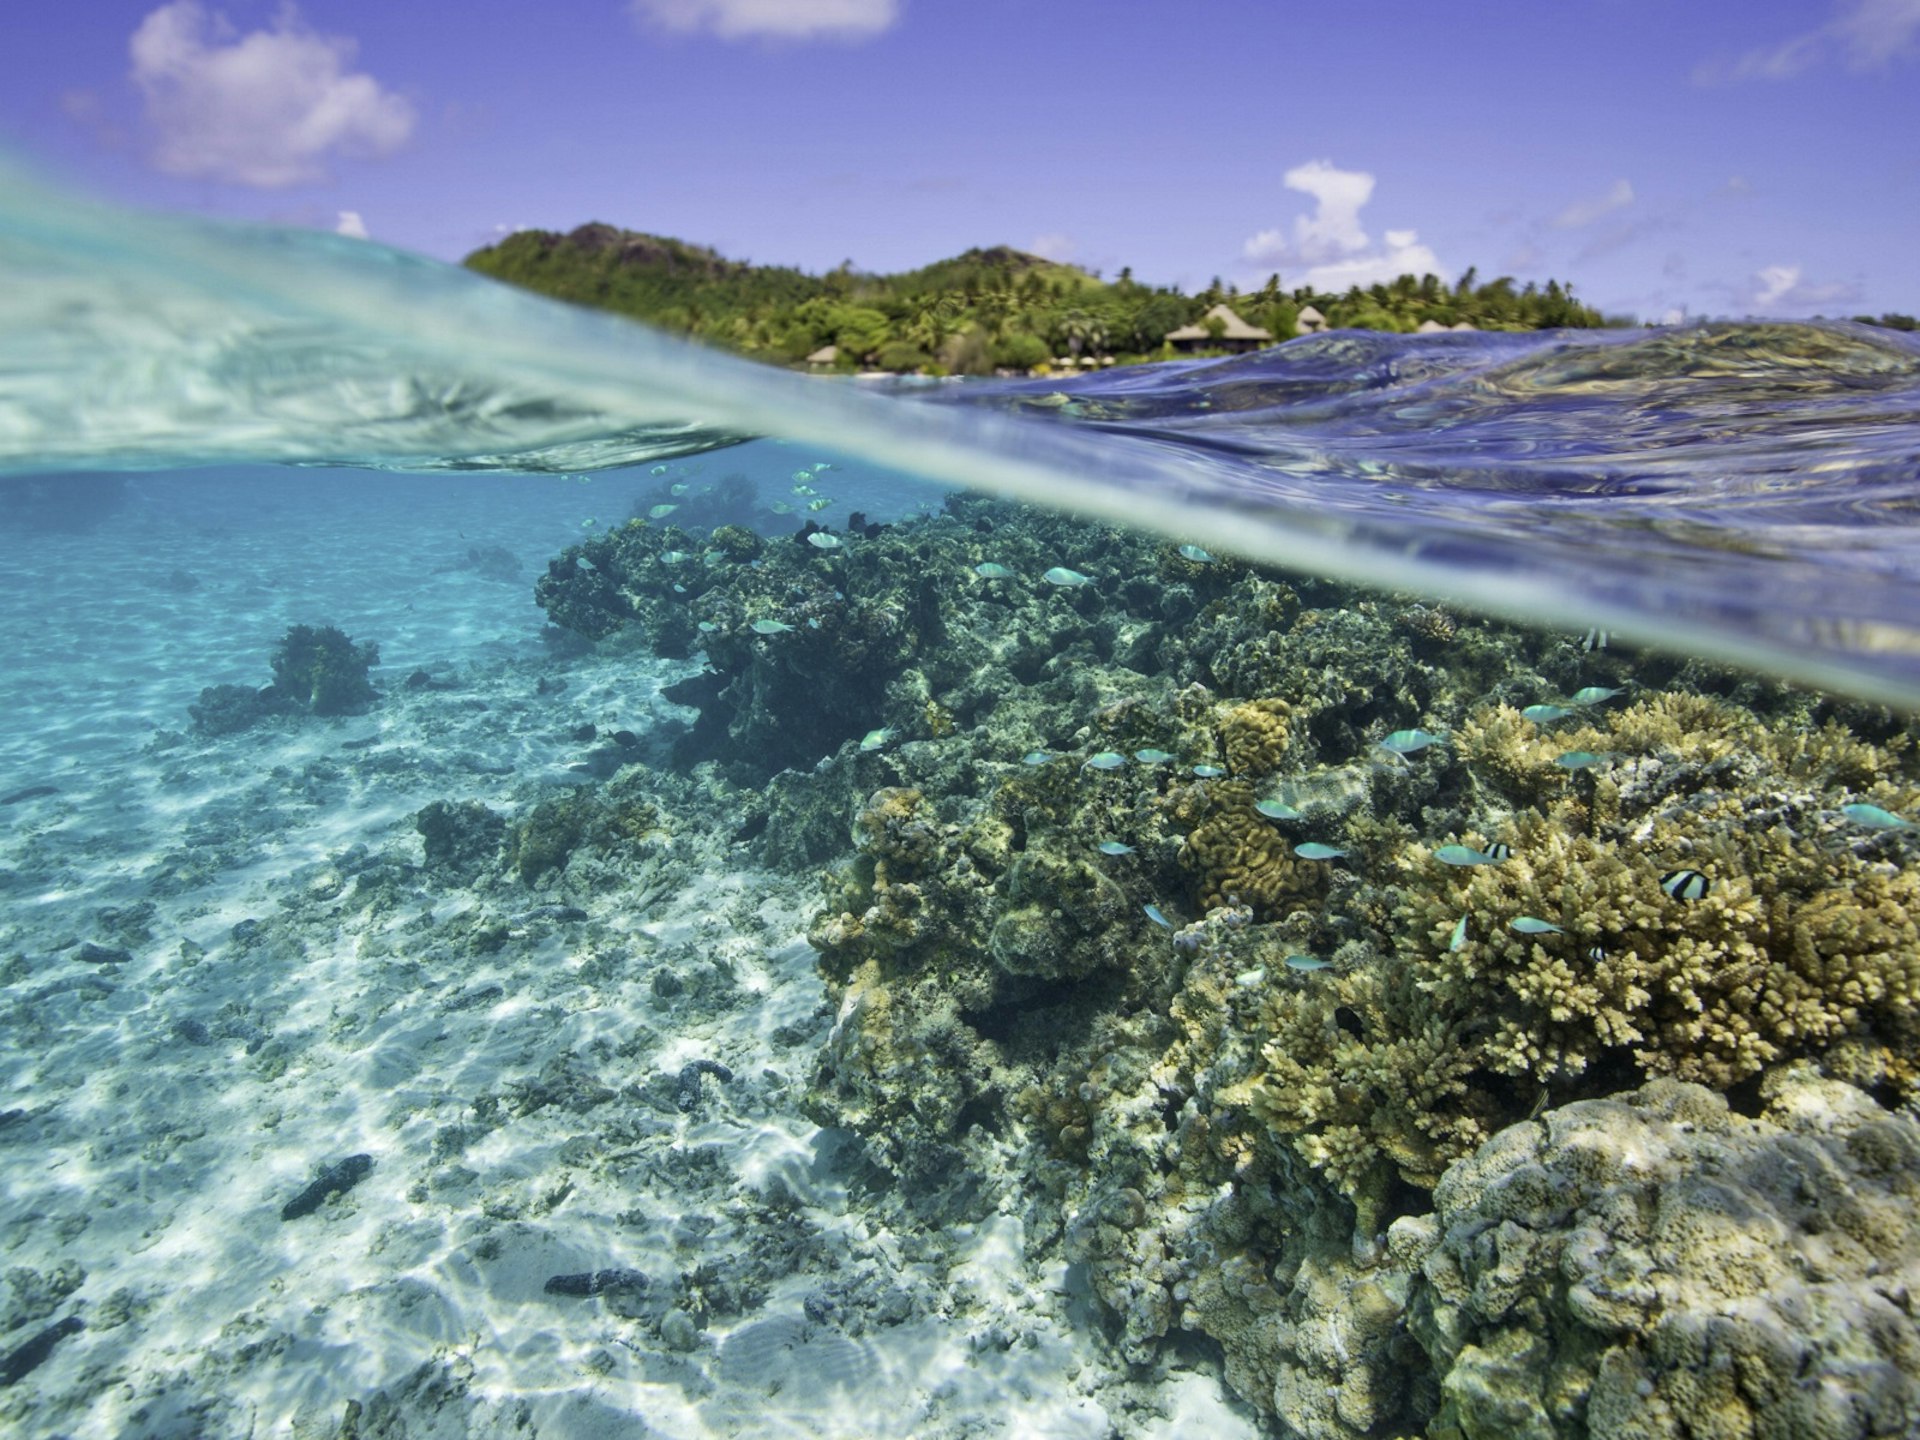 Snorkelling off the coast of Rarotonga, tropical coral reef, blue skies, blue sea, Pacific Islands